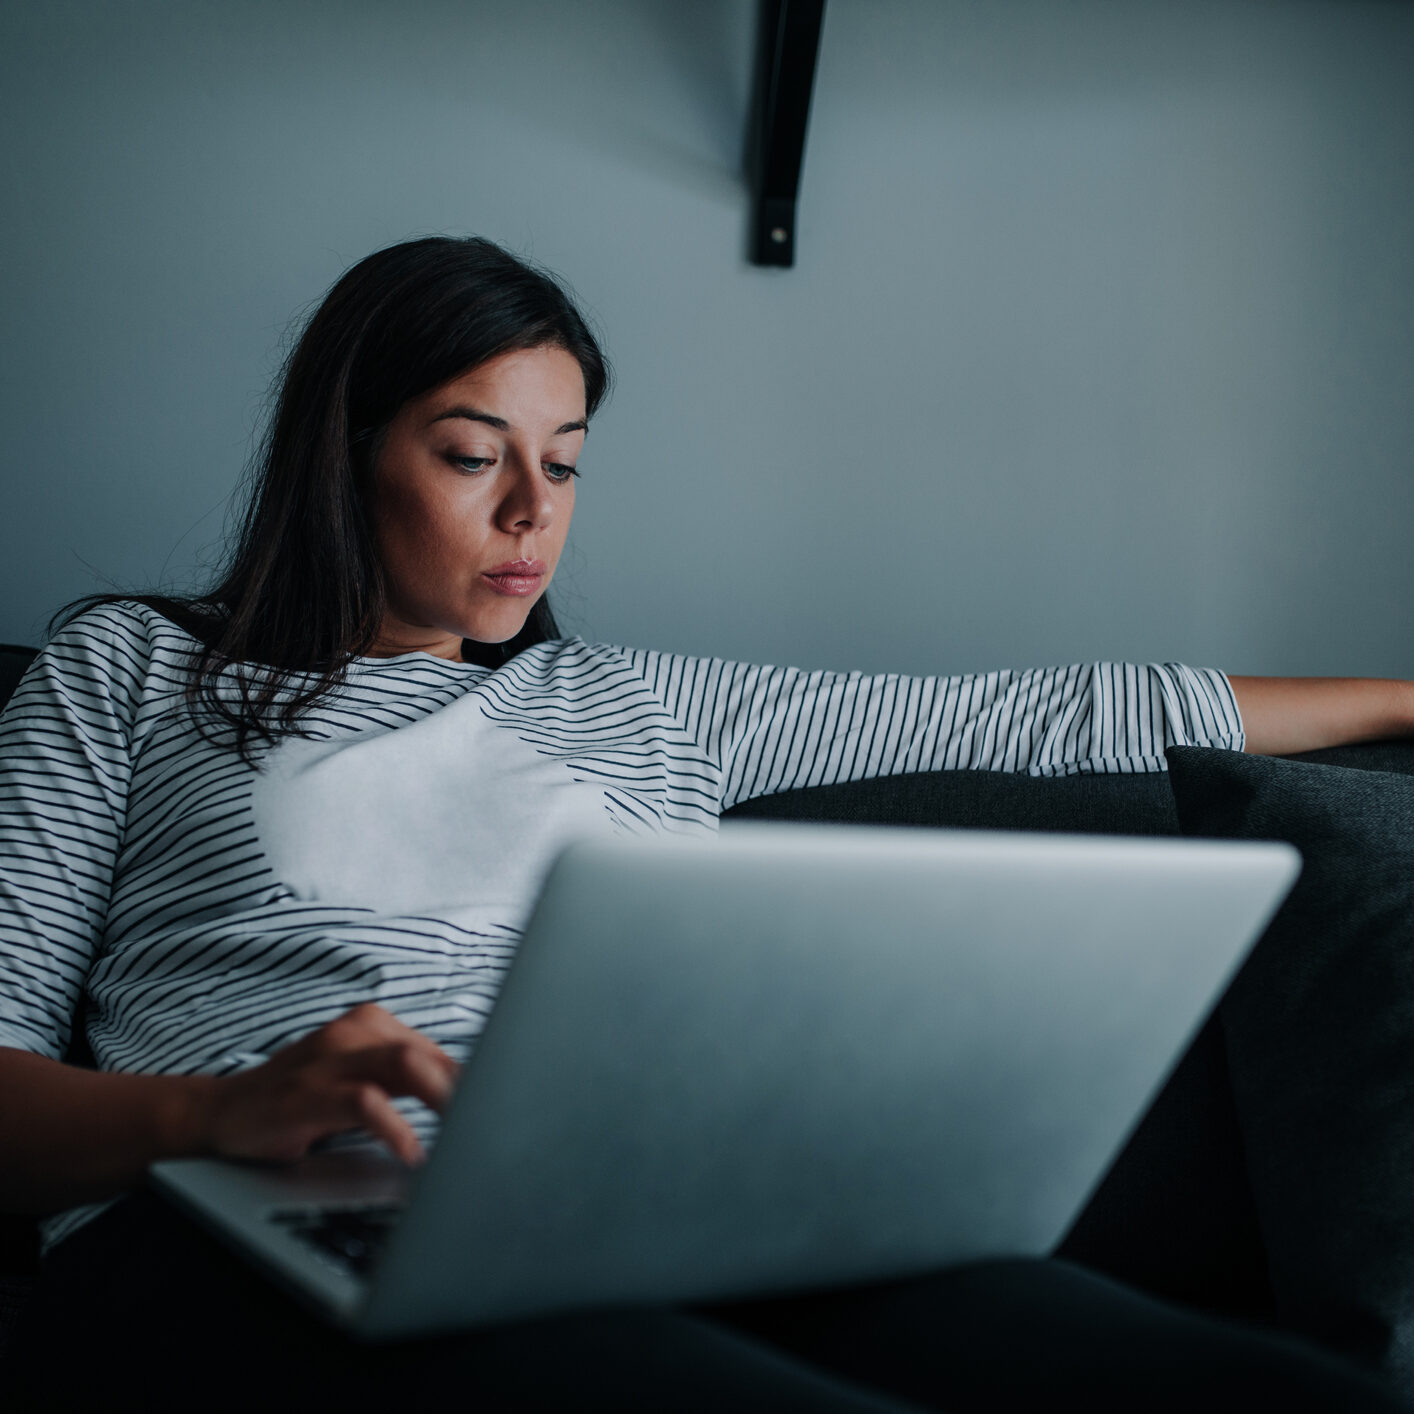 Woman working on a laptop at home, stressed out